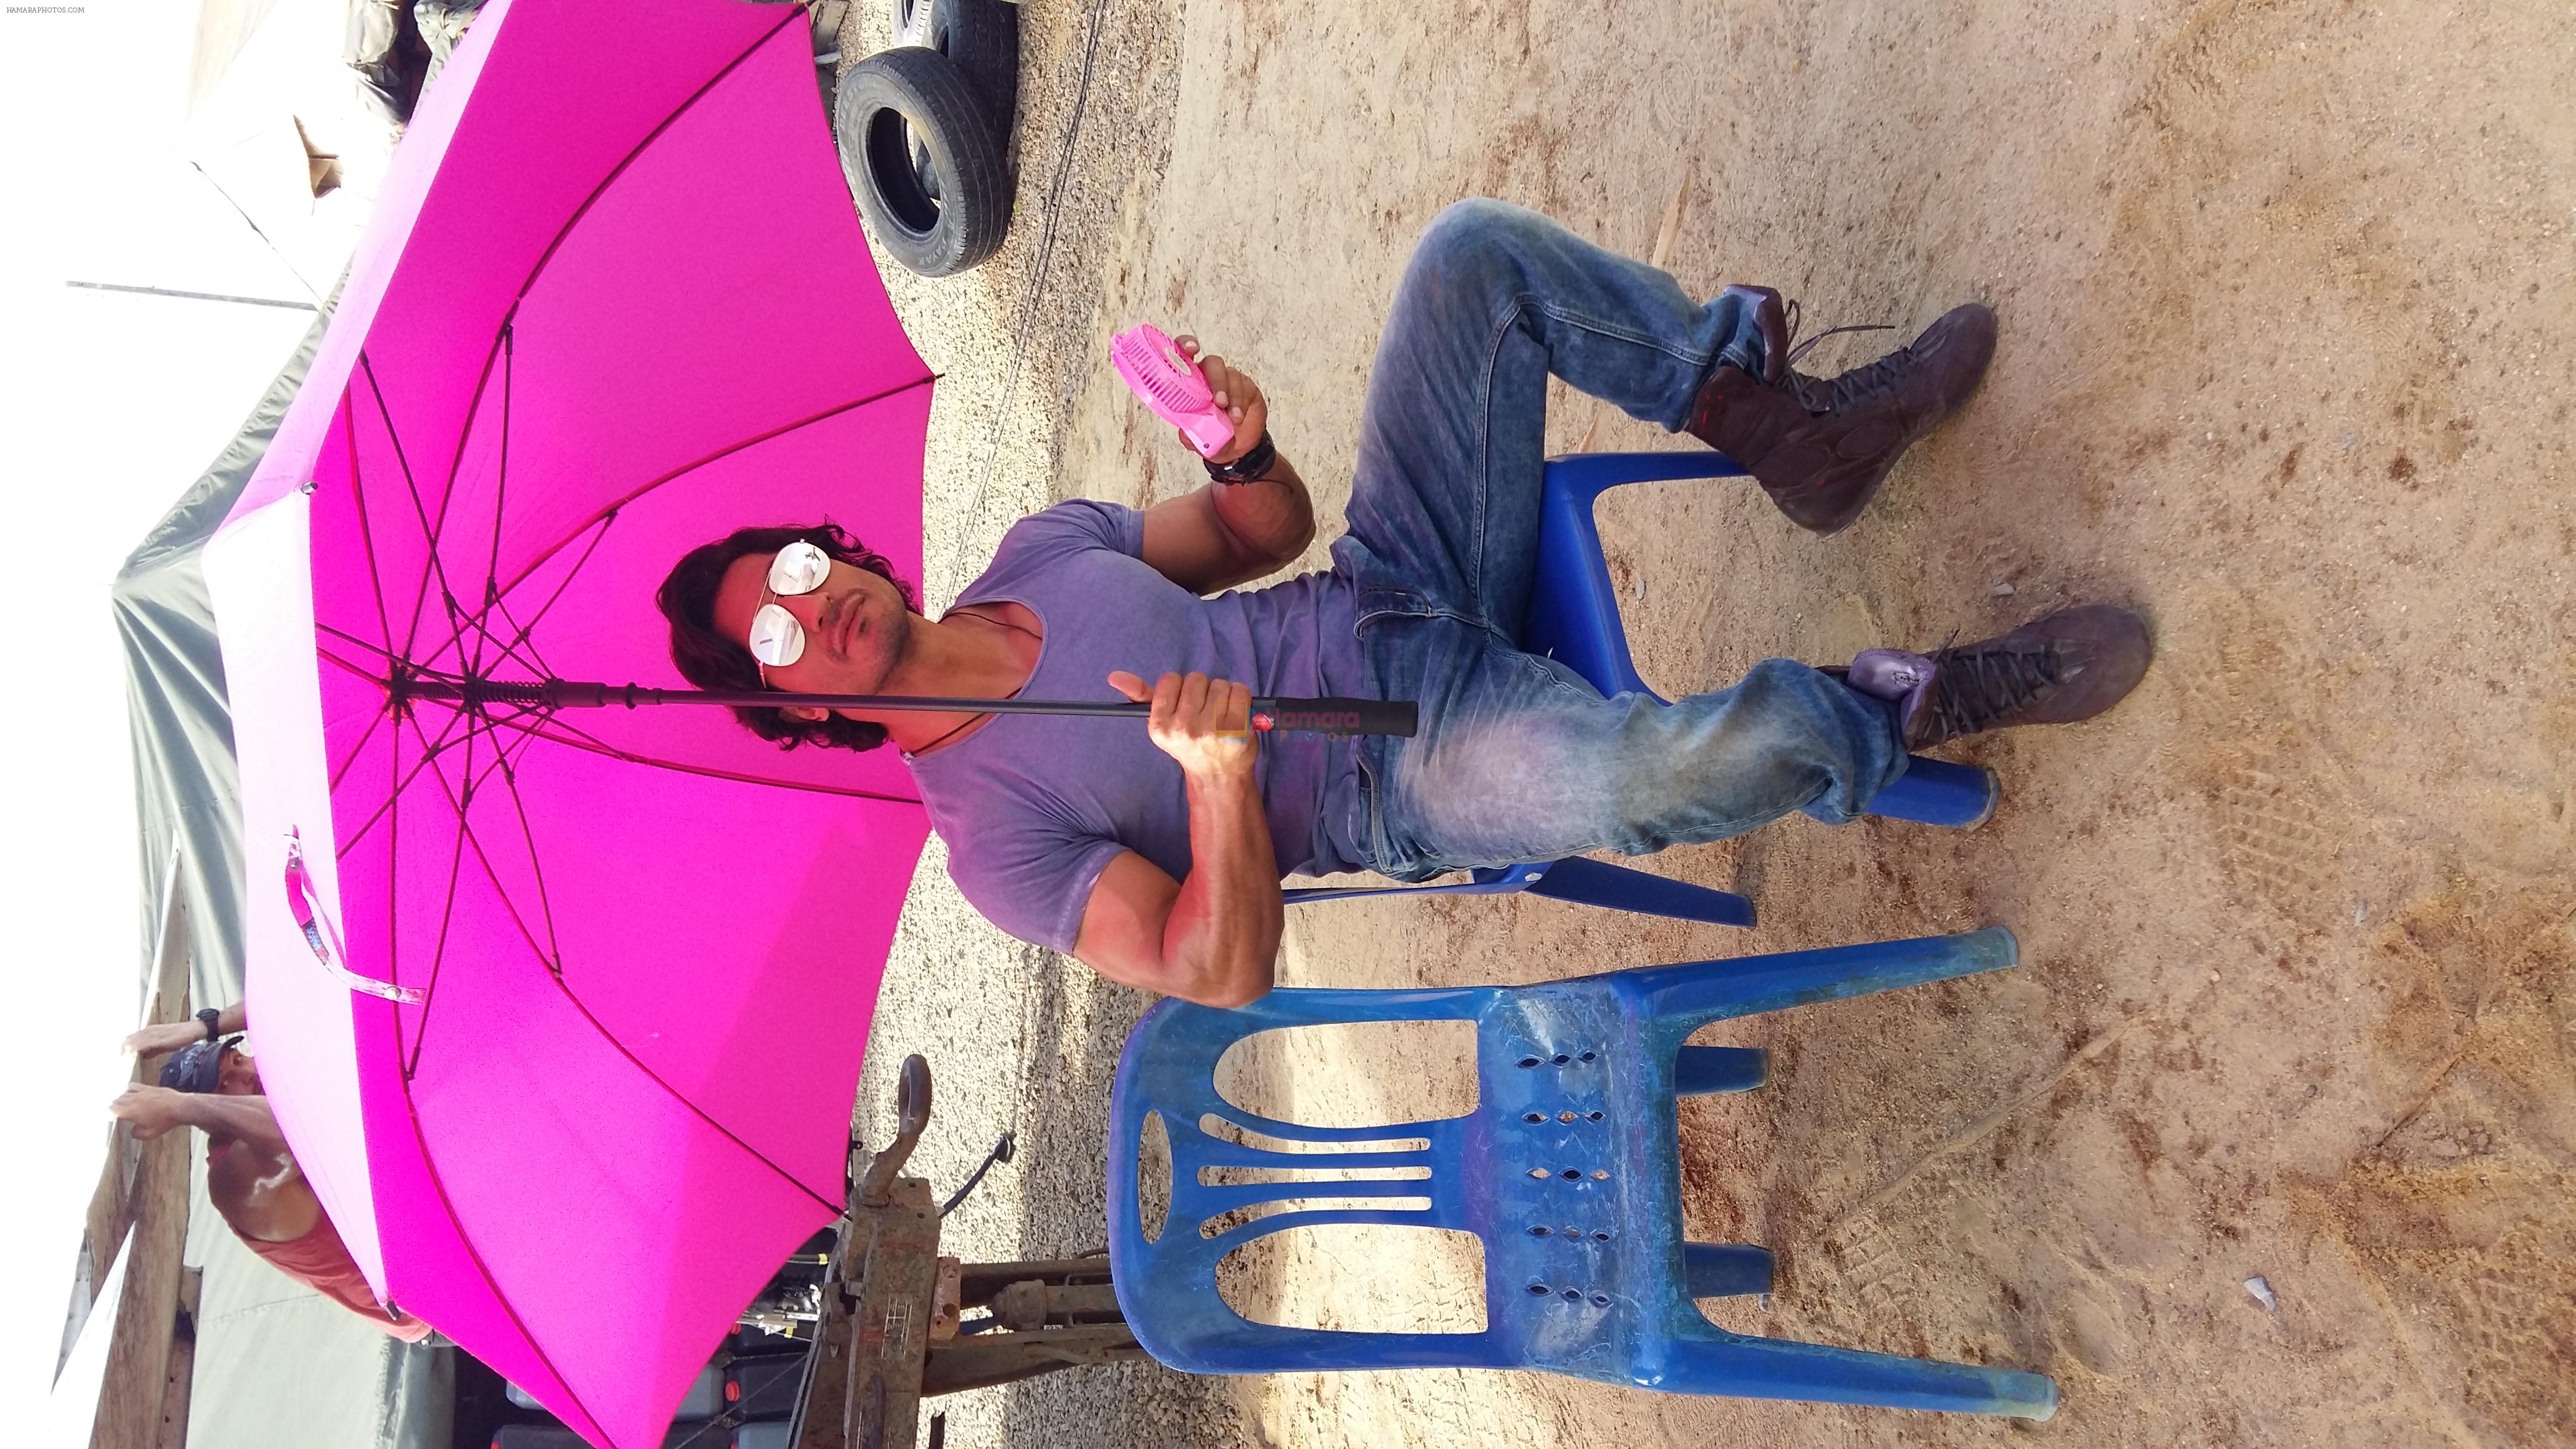 Vidyut Jammwal with a pink fan and umbrella on the sets of Commando 2 clicked by his Co star Adah sharma